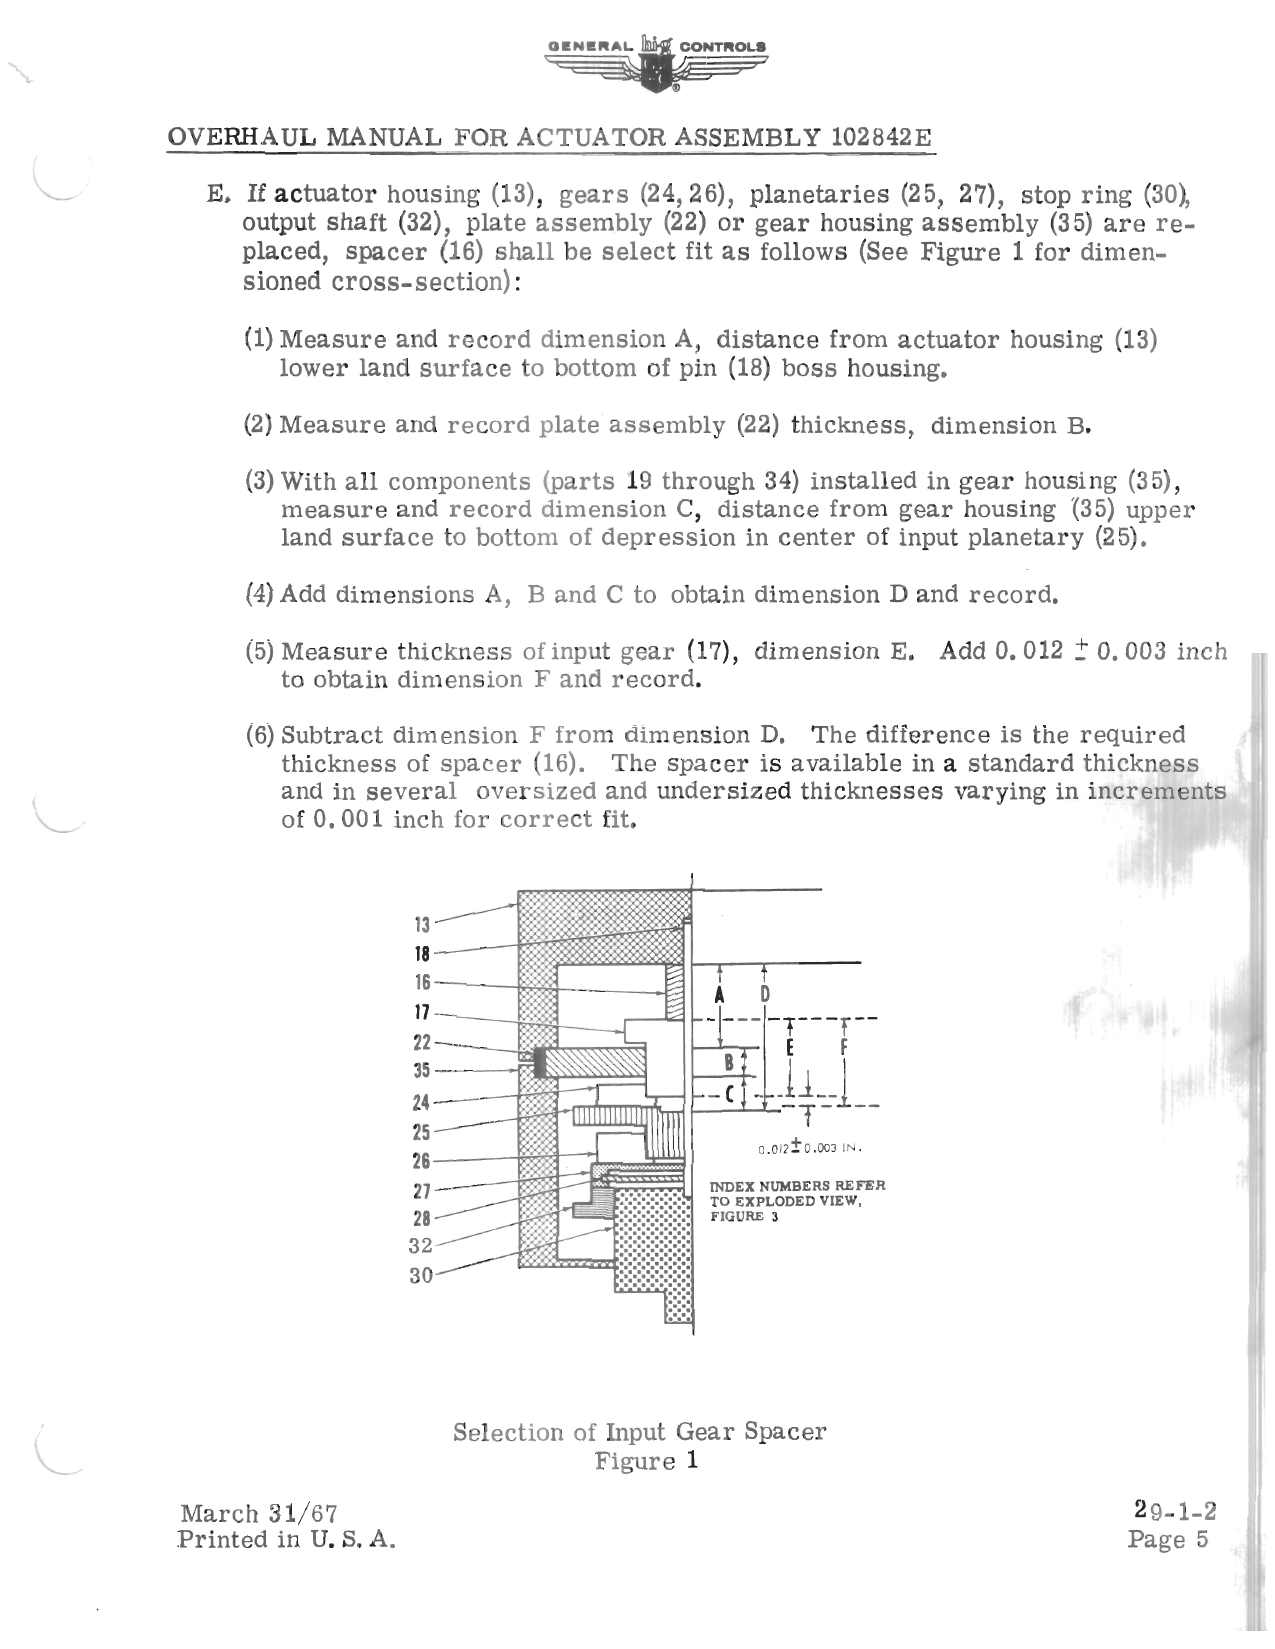 Sample page 5 from AirCorps Library document: Overhaul Manual for Actuator Assembly 102842E 